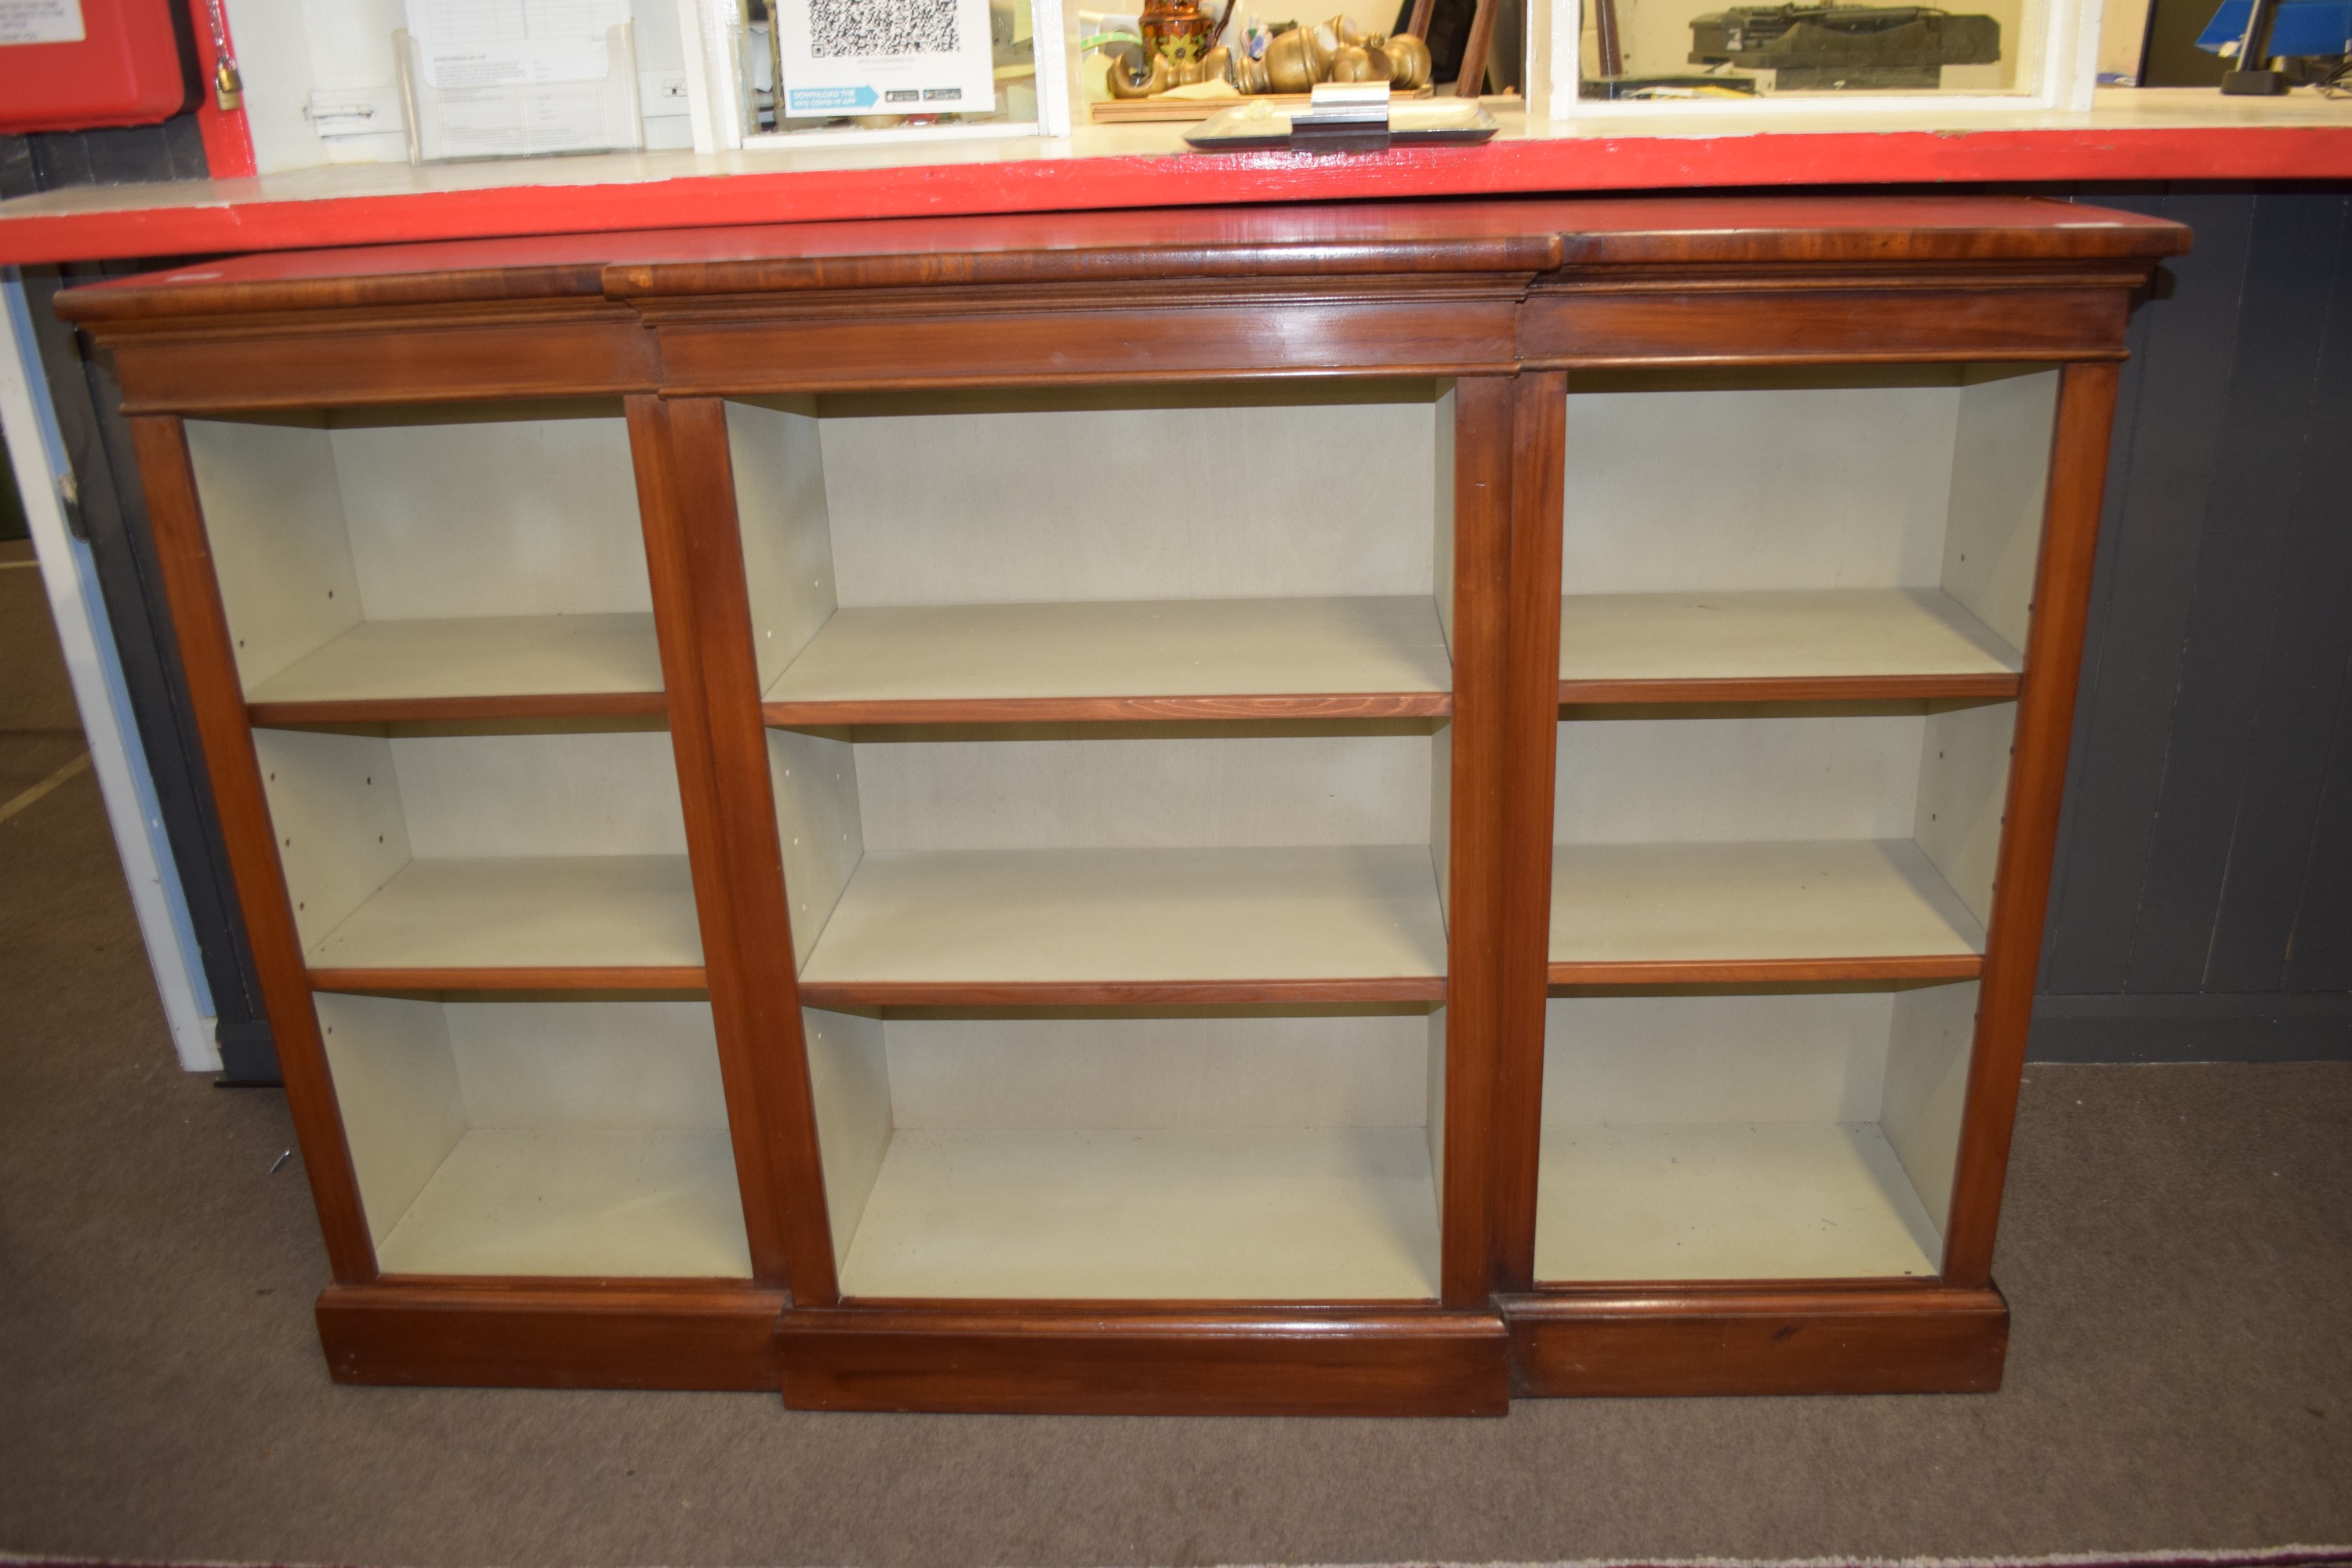 Good quality reproduction mahogany effect break front bookcase with strung and cross banded